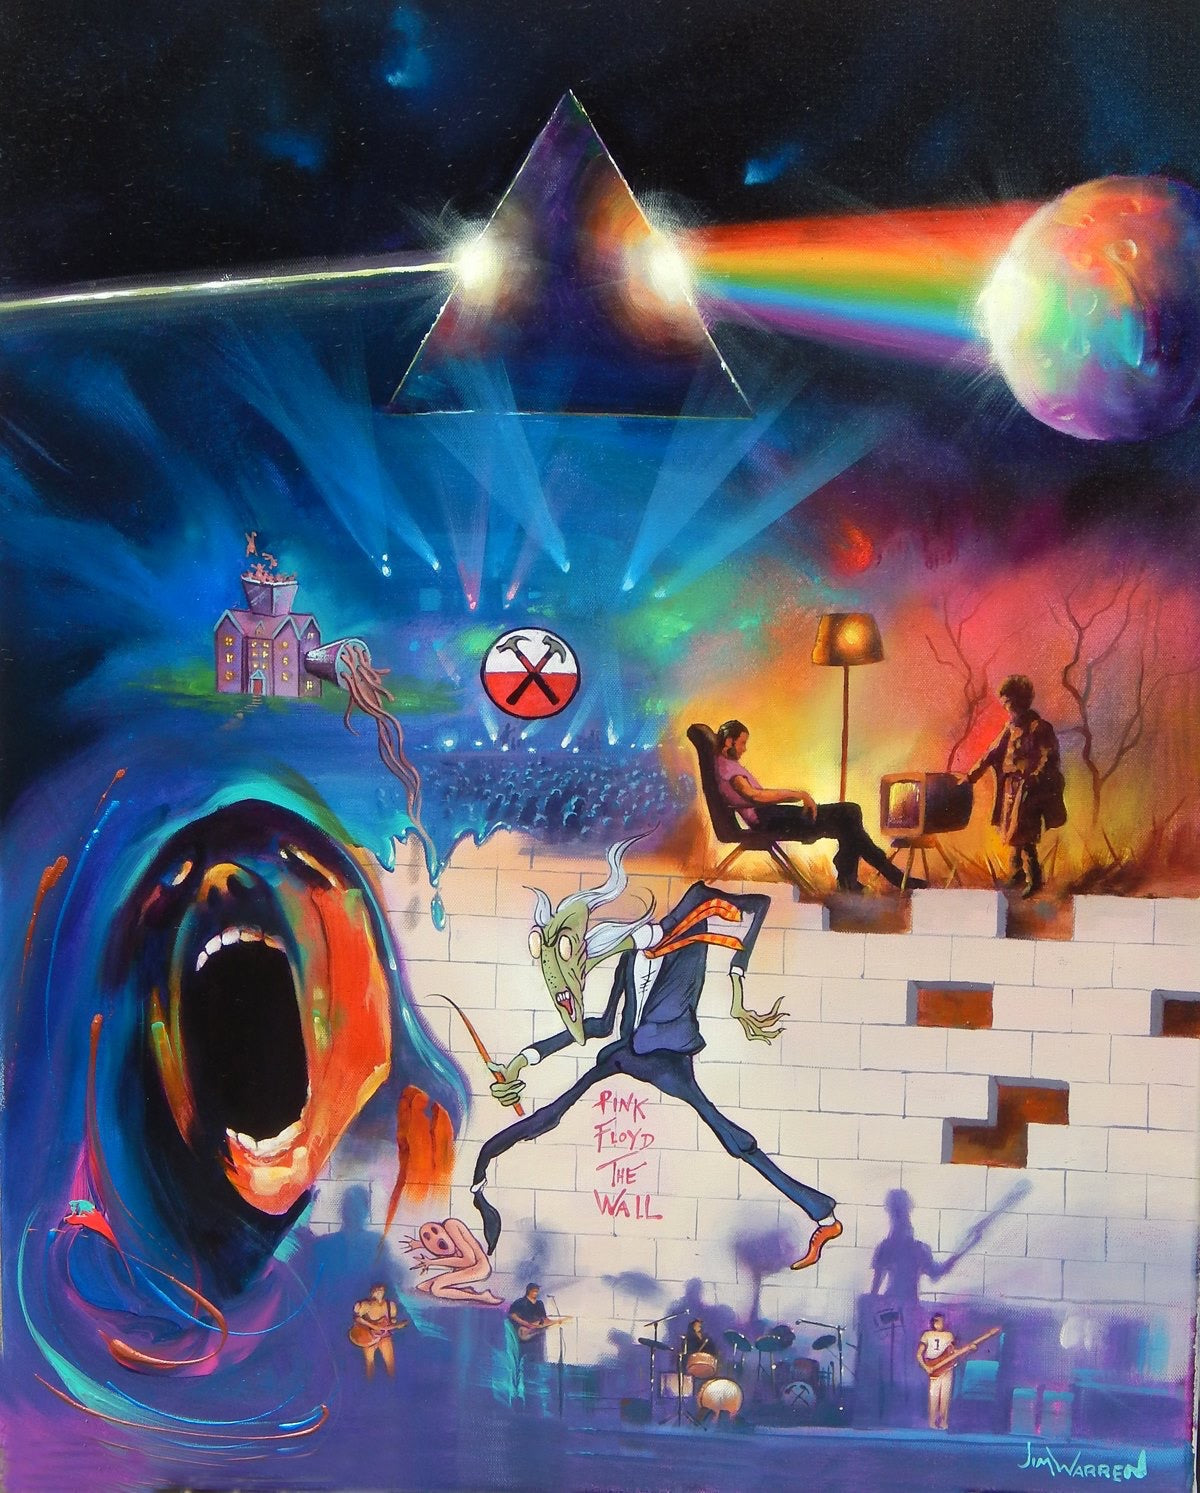 The Art of Pink Floyd The Wall